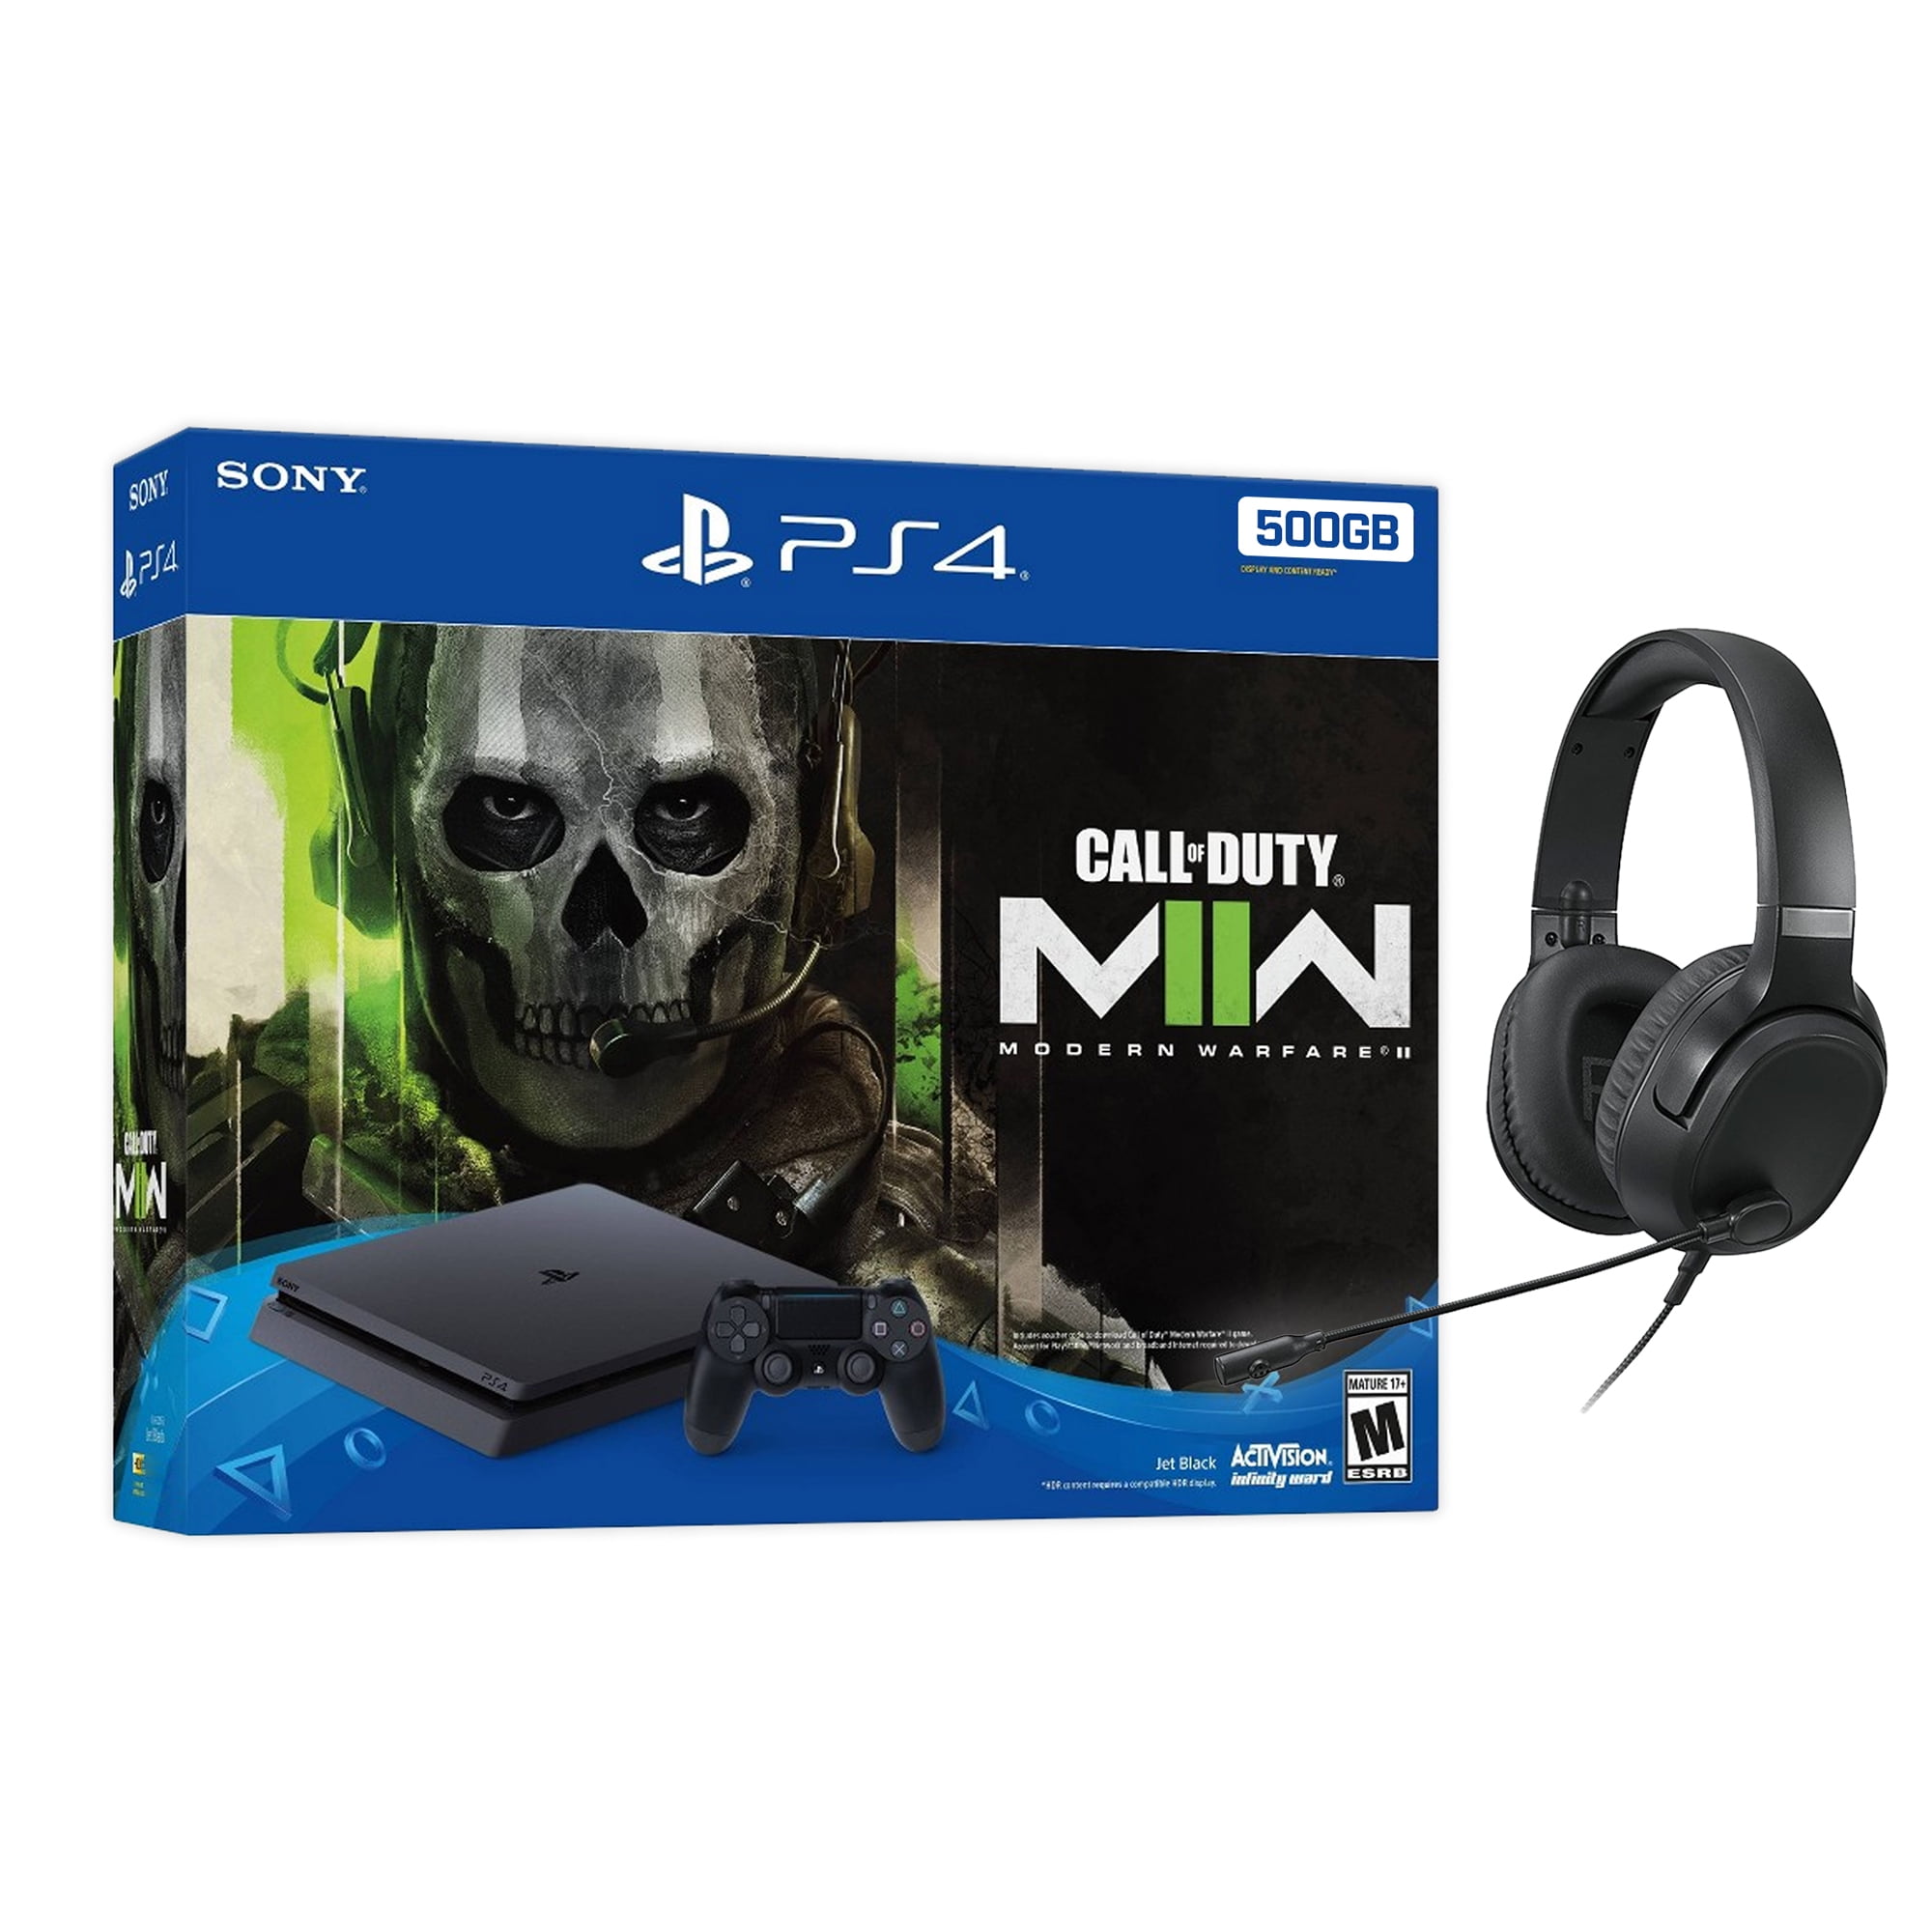 Sony PlayStation Slim Call of Duty Modern Warfare II Bundle Upgrade 2TB HDD PS4 Gaming Console, Jet Black, with Mytrix Chat Headset Large Capacity Internal Hard Drive Enhanced PS4 Console -